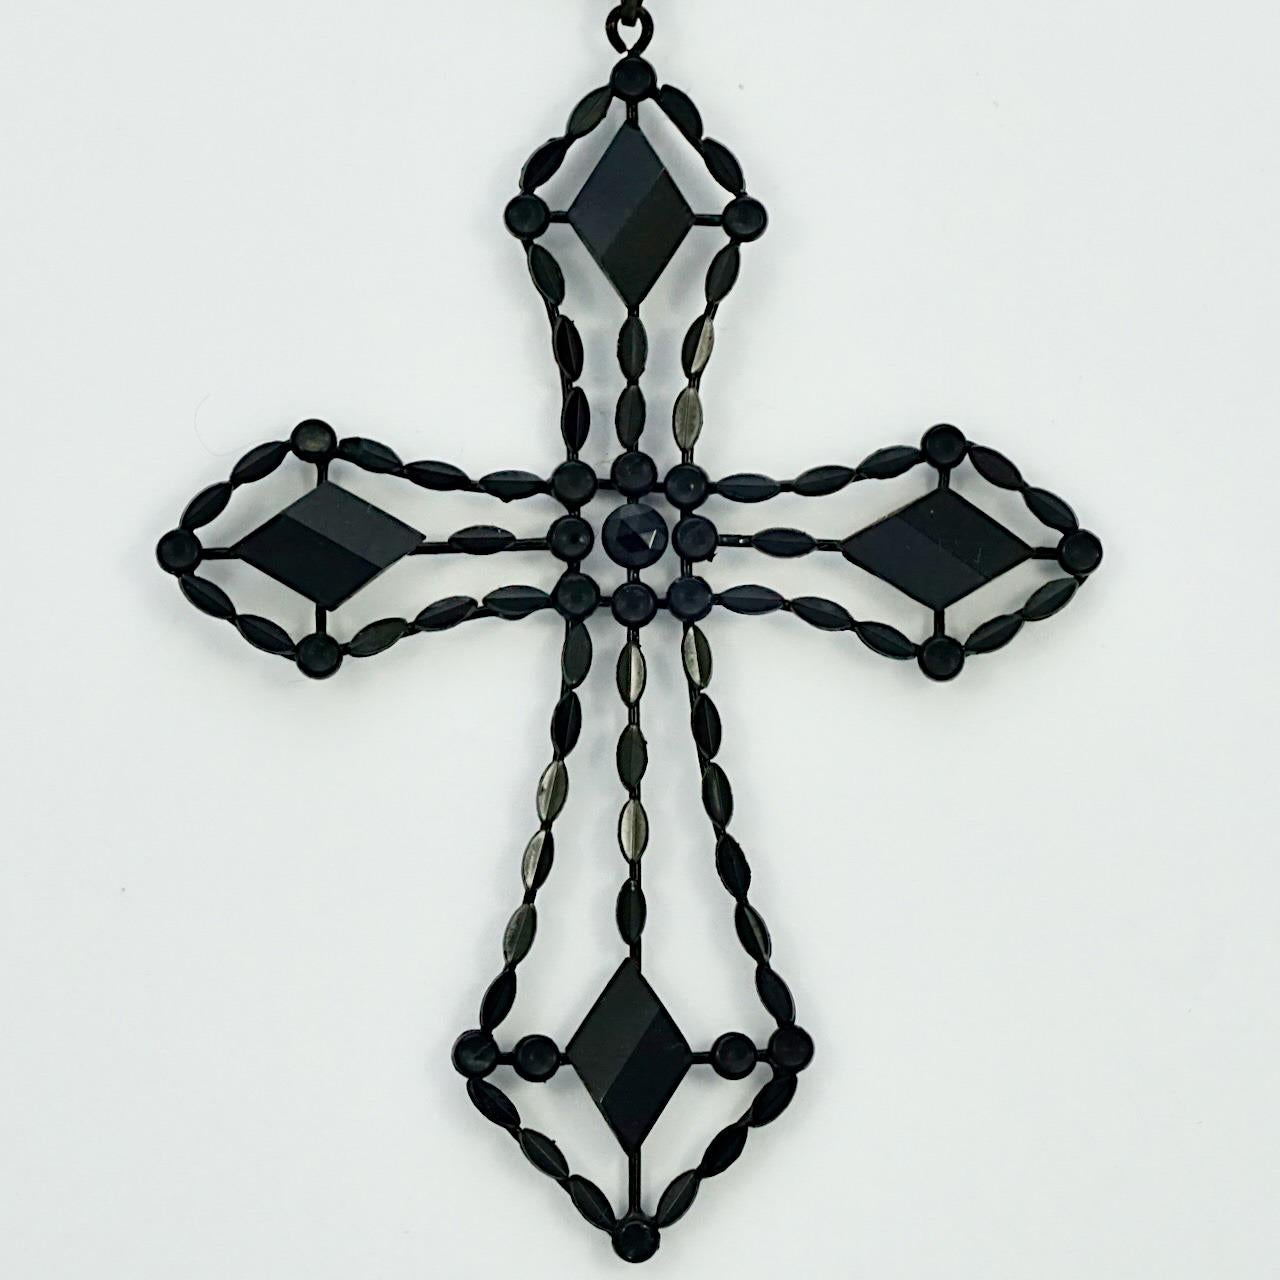 Art Deco large french jet cross pendant, with a black glass bead chain necklace. The beautiful pendant has faceted french jet pieces. Each piece is in a black enameled setting and applied to enameled wire. Measuring length 9.6 cm / 3.77 inches by